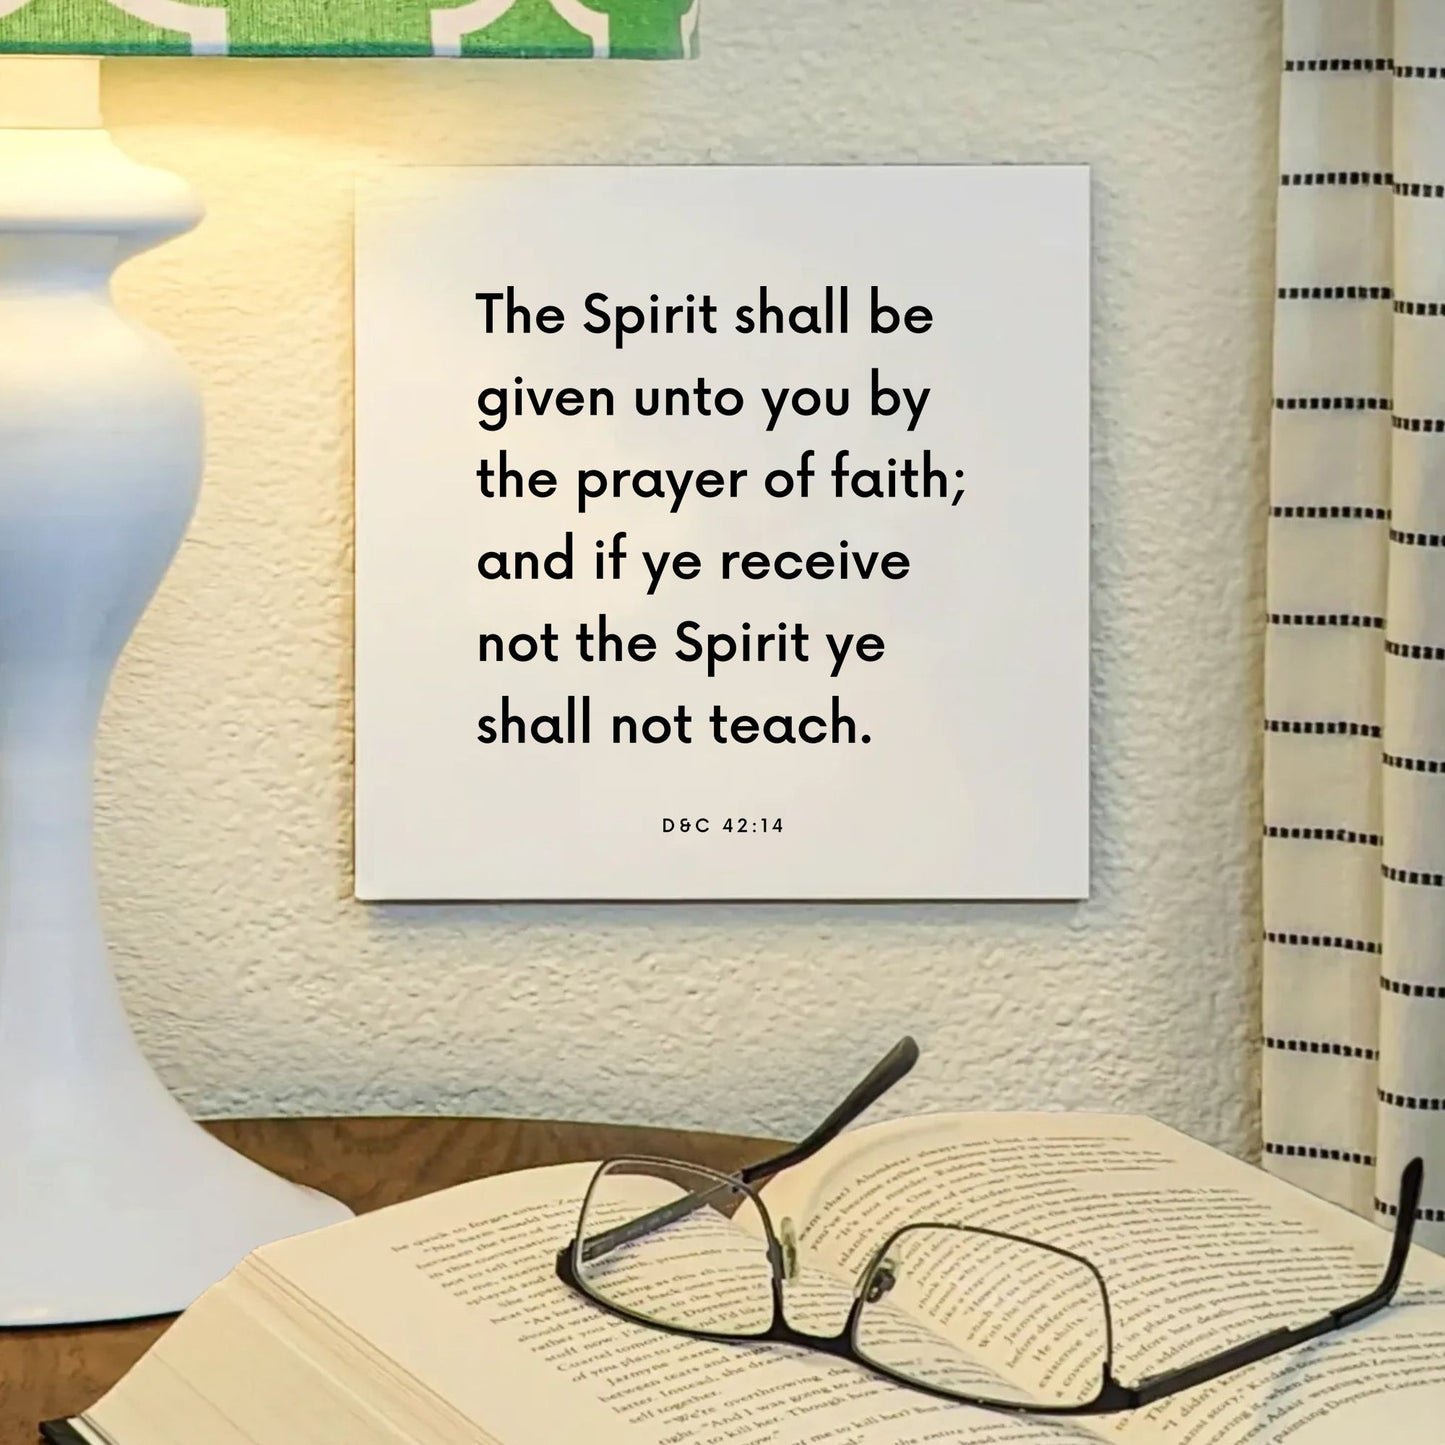 Lamp mouting of the scripture tile for D&C 42:14 - "If ye receive not the Spirit ye shall not teach"